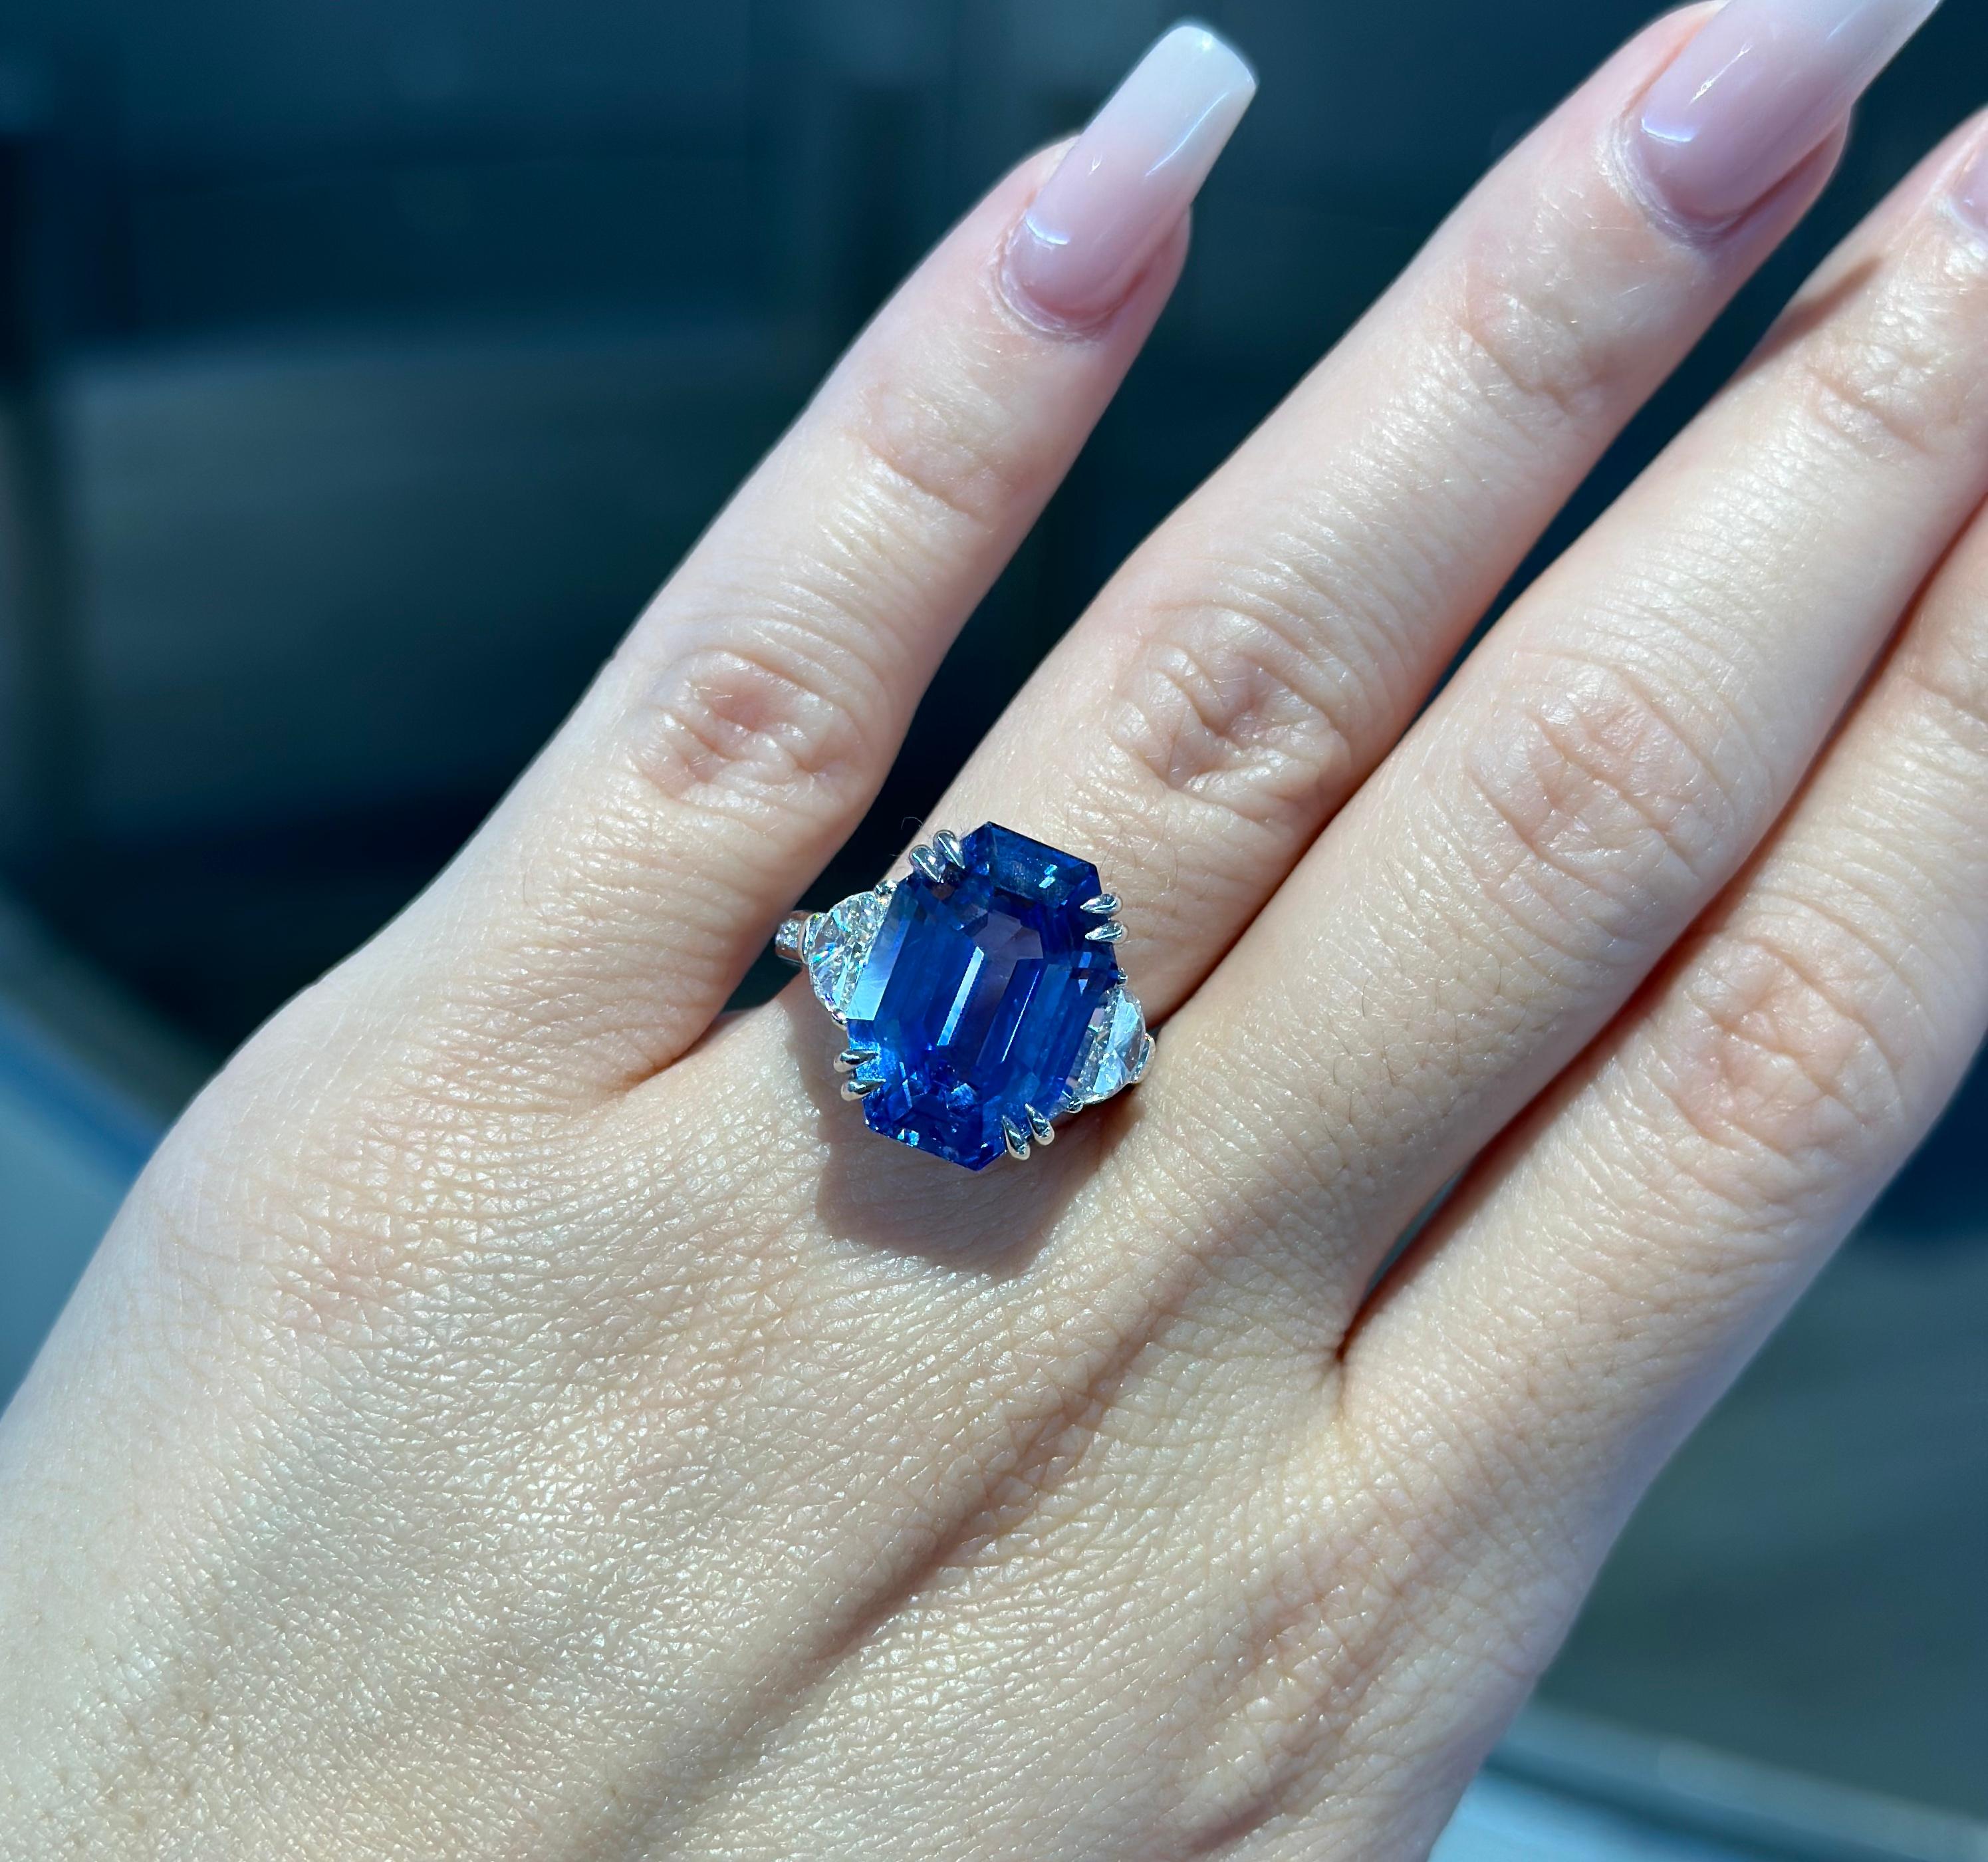 Stand Out with this stunning 14.58 carat No Heat Natural Sapphire and Diamond Engagement Statement Ring in 18K White Gold

Sri Lanka Ceylon is renowned for its extraordinary flawless sapphires with royal blue color.

This ring proudly showcases a